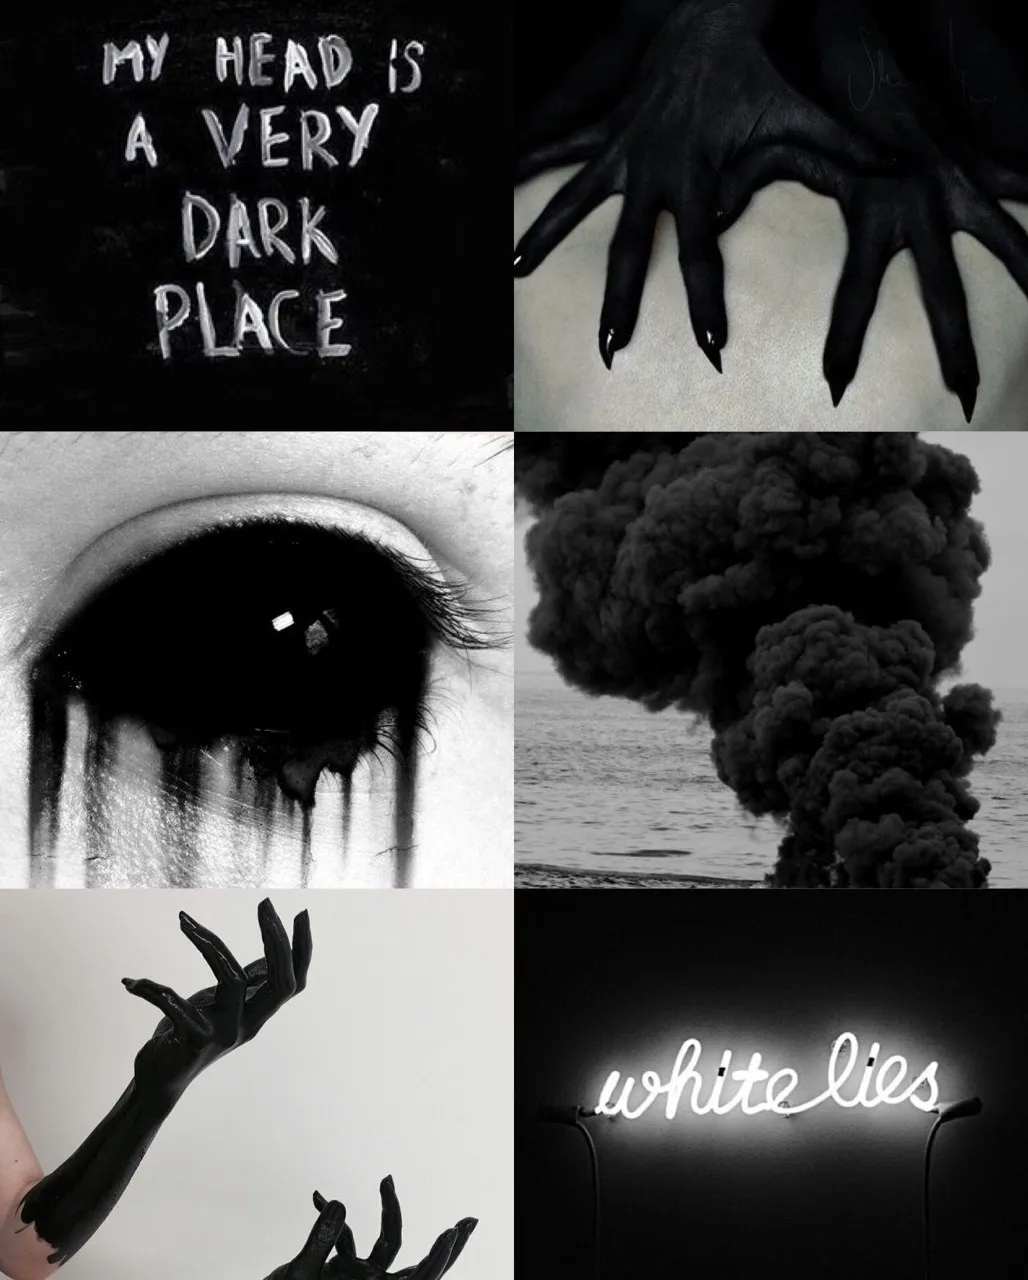 Learn as if you'll learn forever — Demon Aesthetic “ The more you see of  evil, the...